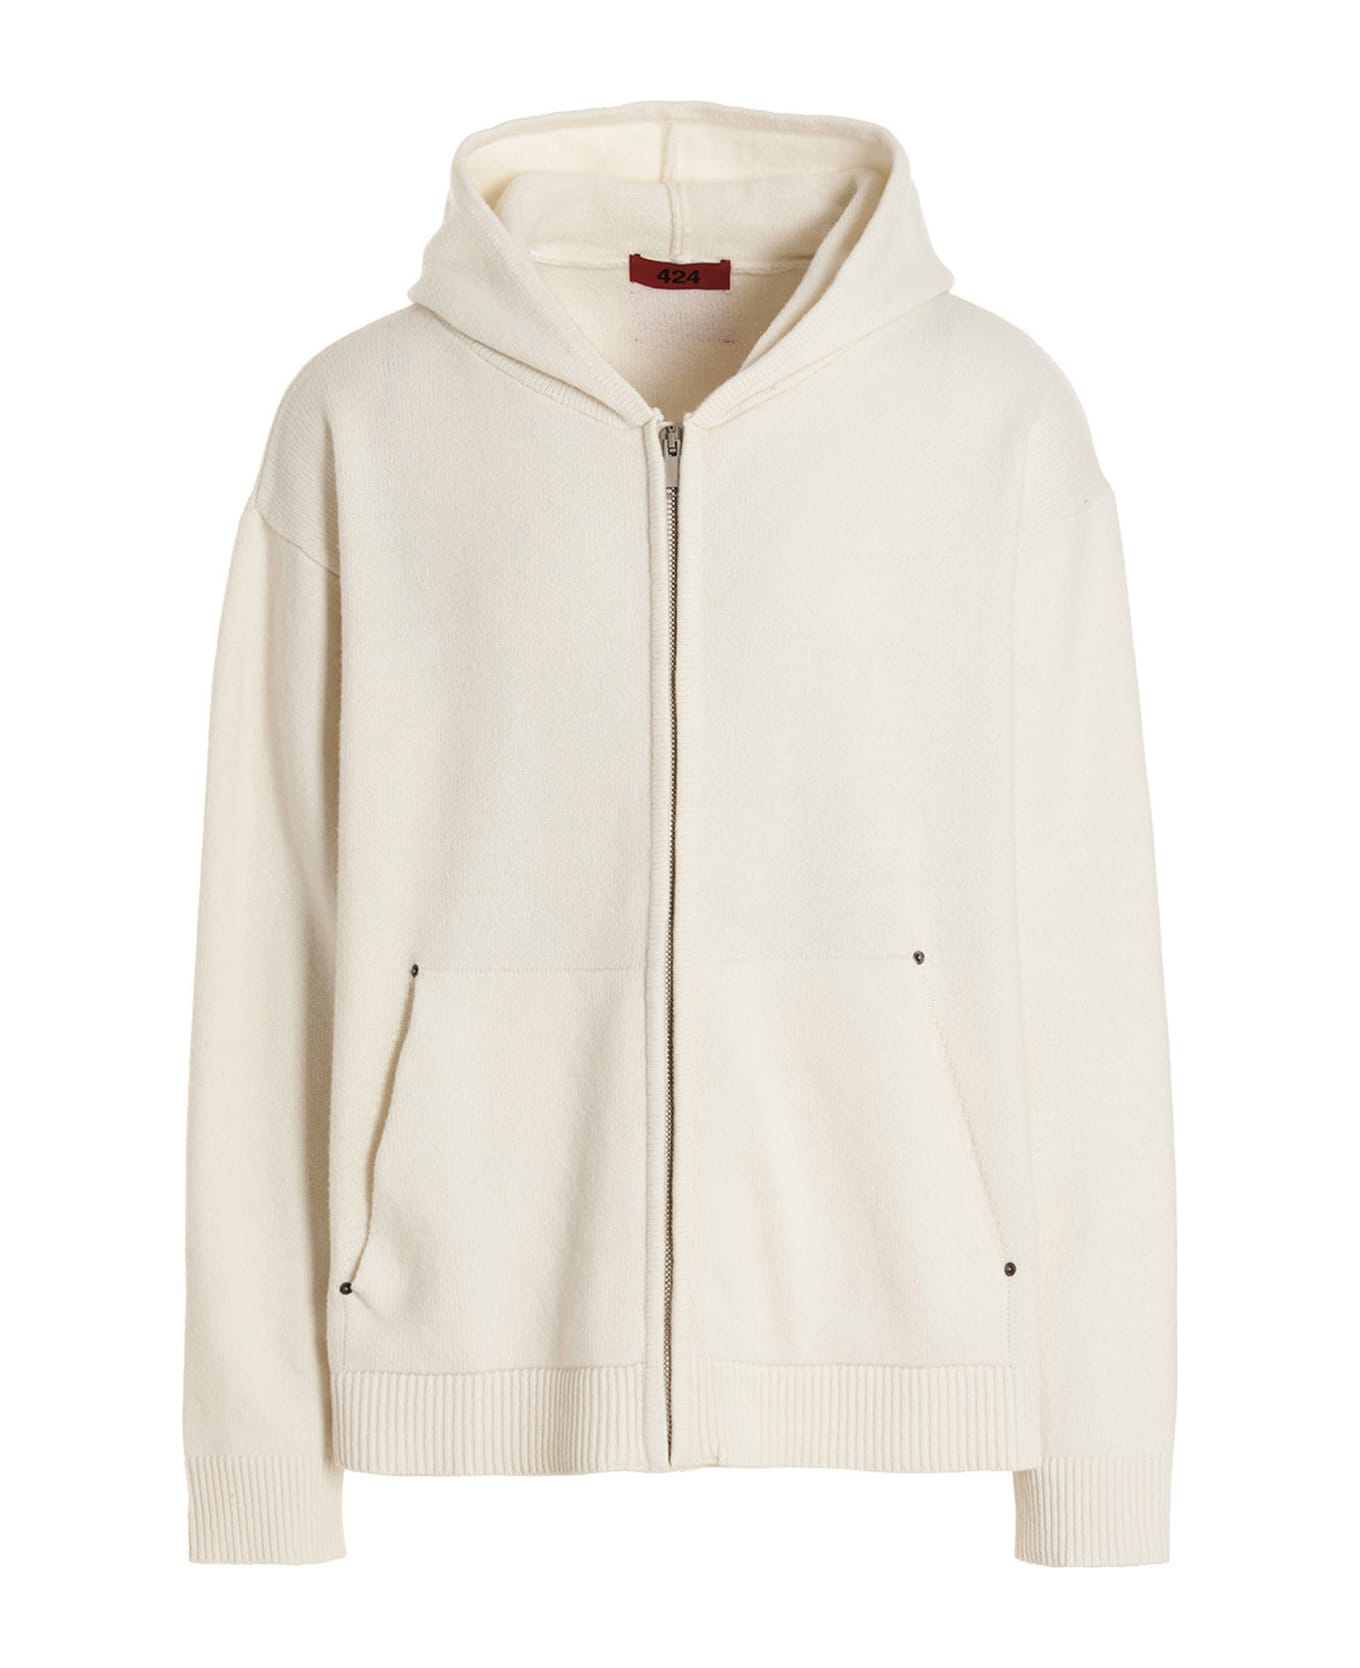 FourTwoFour on Fairfax Embroidery Hooded Cardigan - Bianco